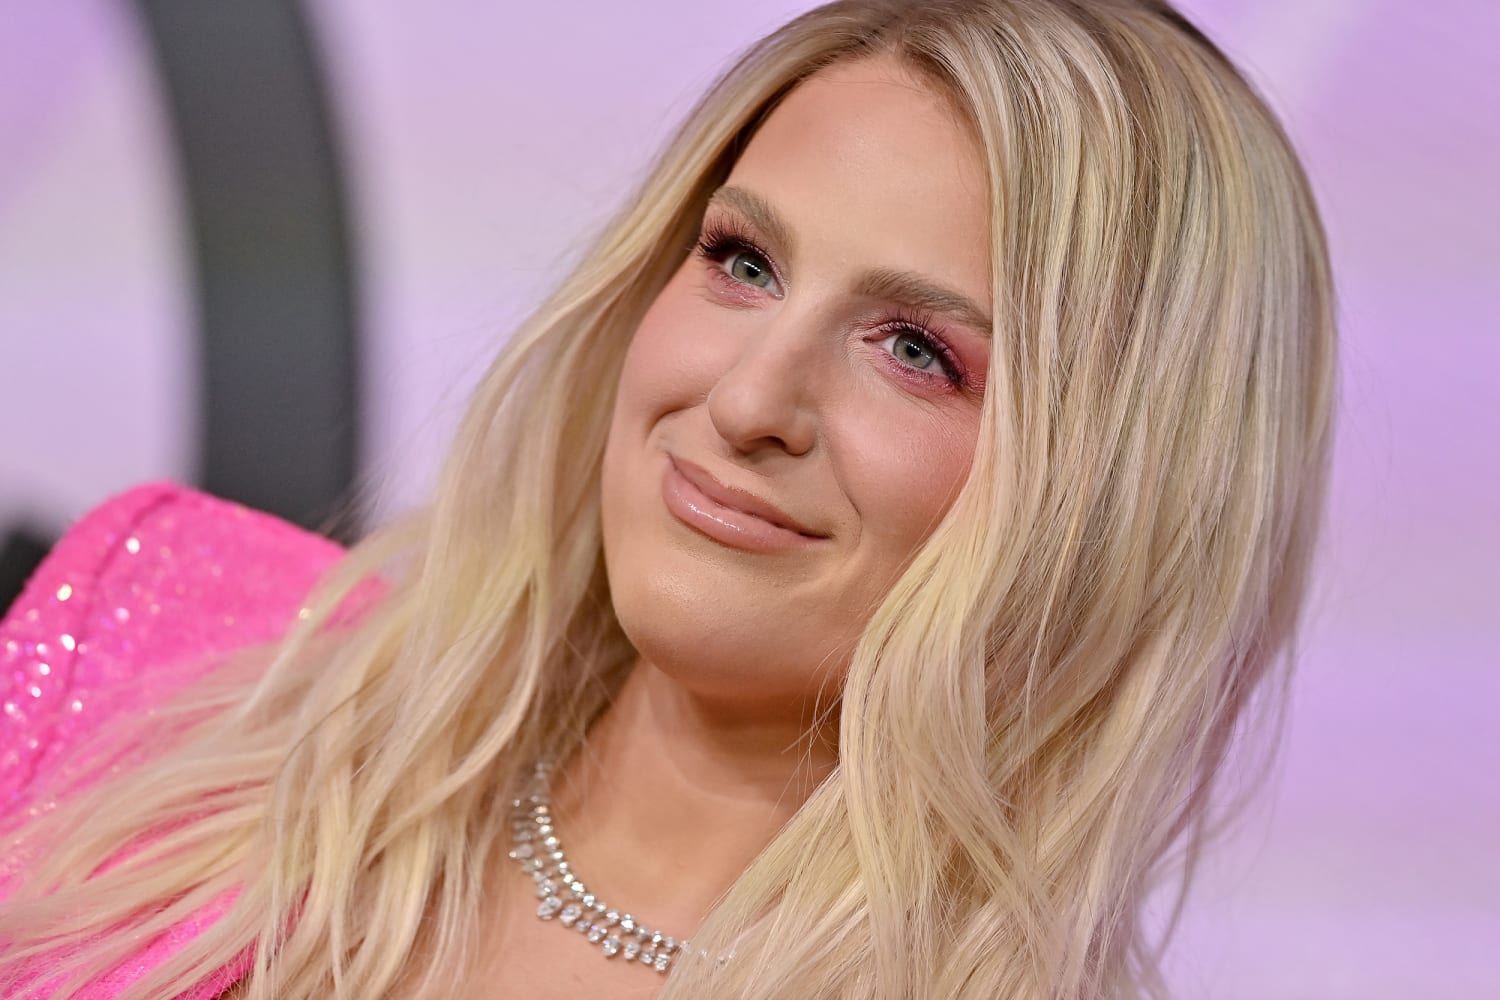 Meghan Trainor Hardcore Porn - Meghan Trainor Shares Video of Moment She Learned of Pregnancy